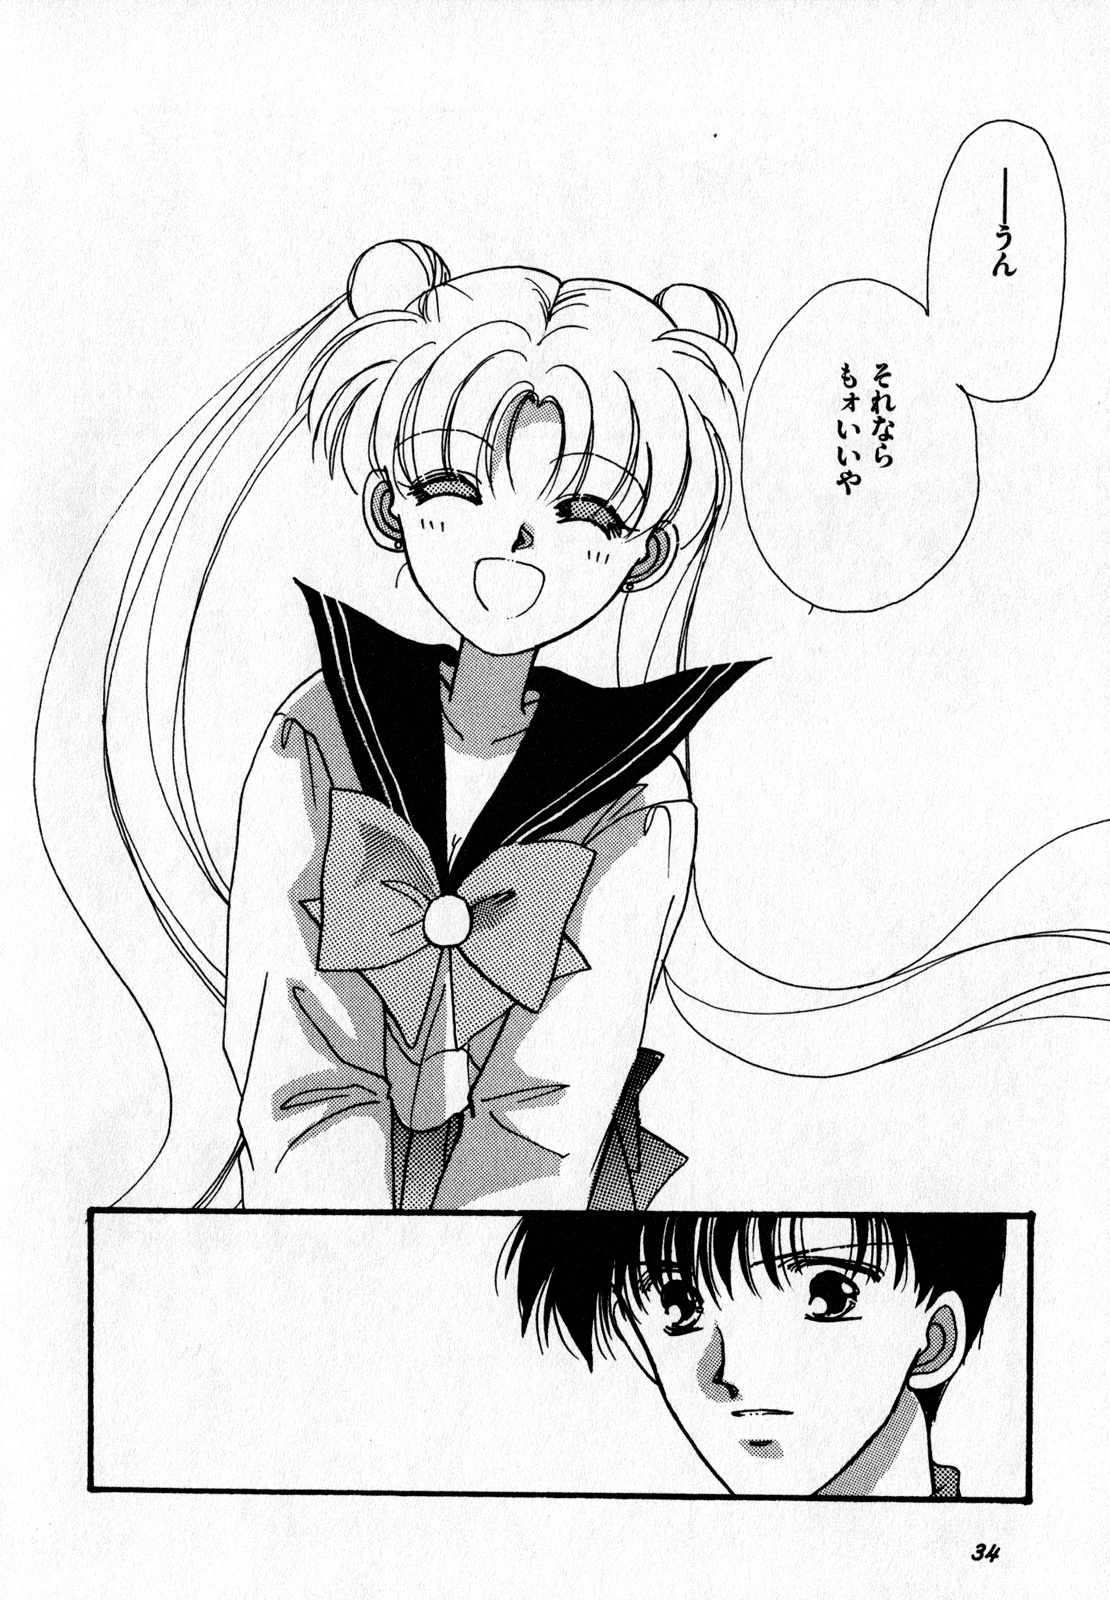 [Anthology] Lunatic Party 7 (Sailor Moon) page 35 full